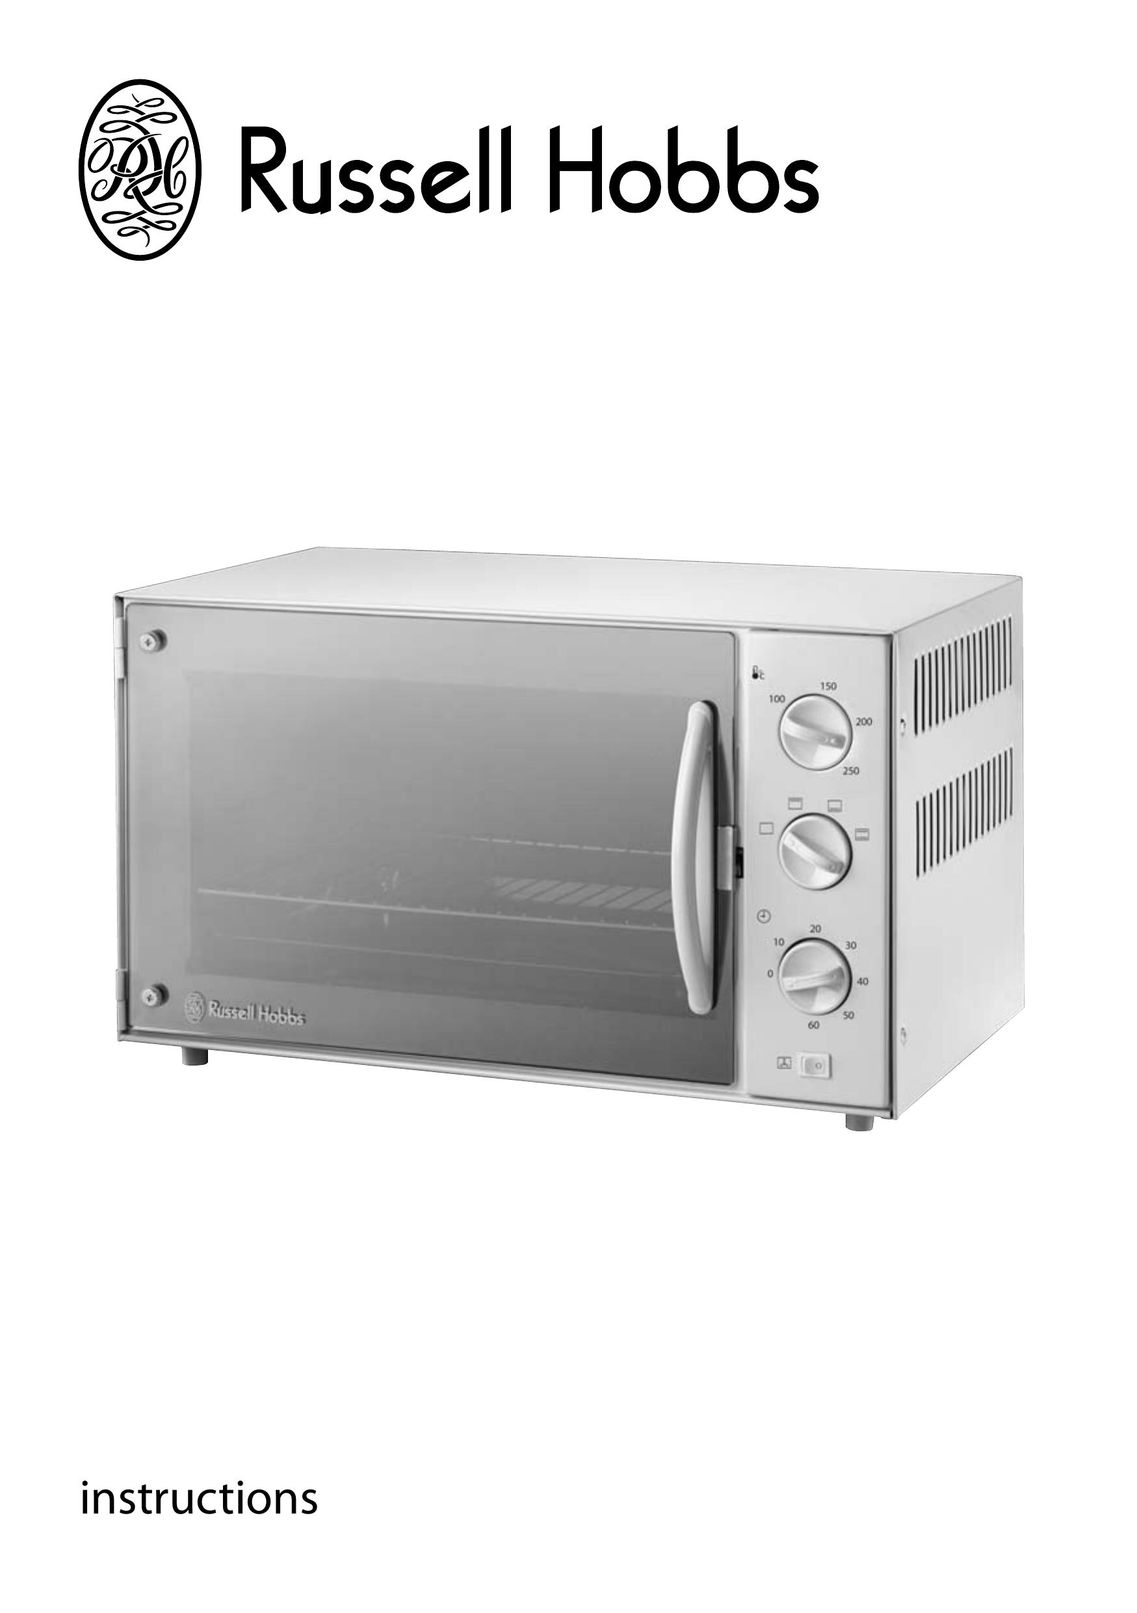 Russell Hobbs 550-004 Oven User Manual